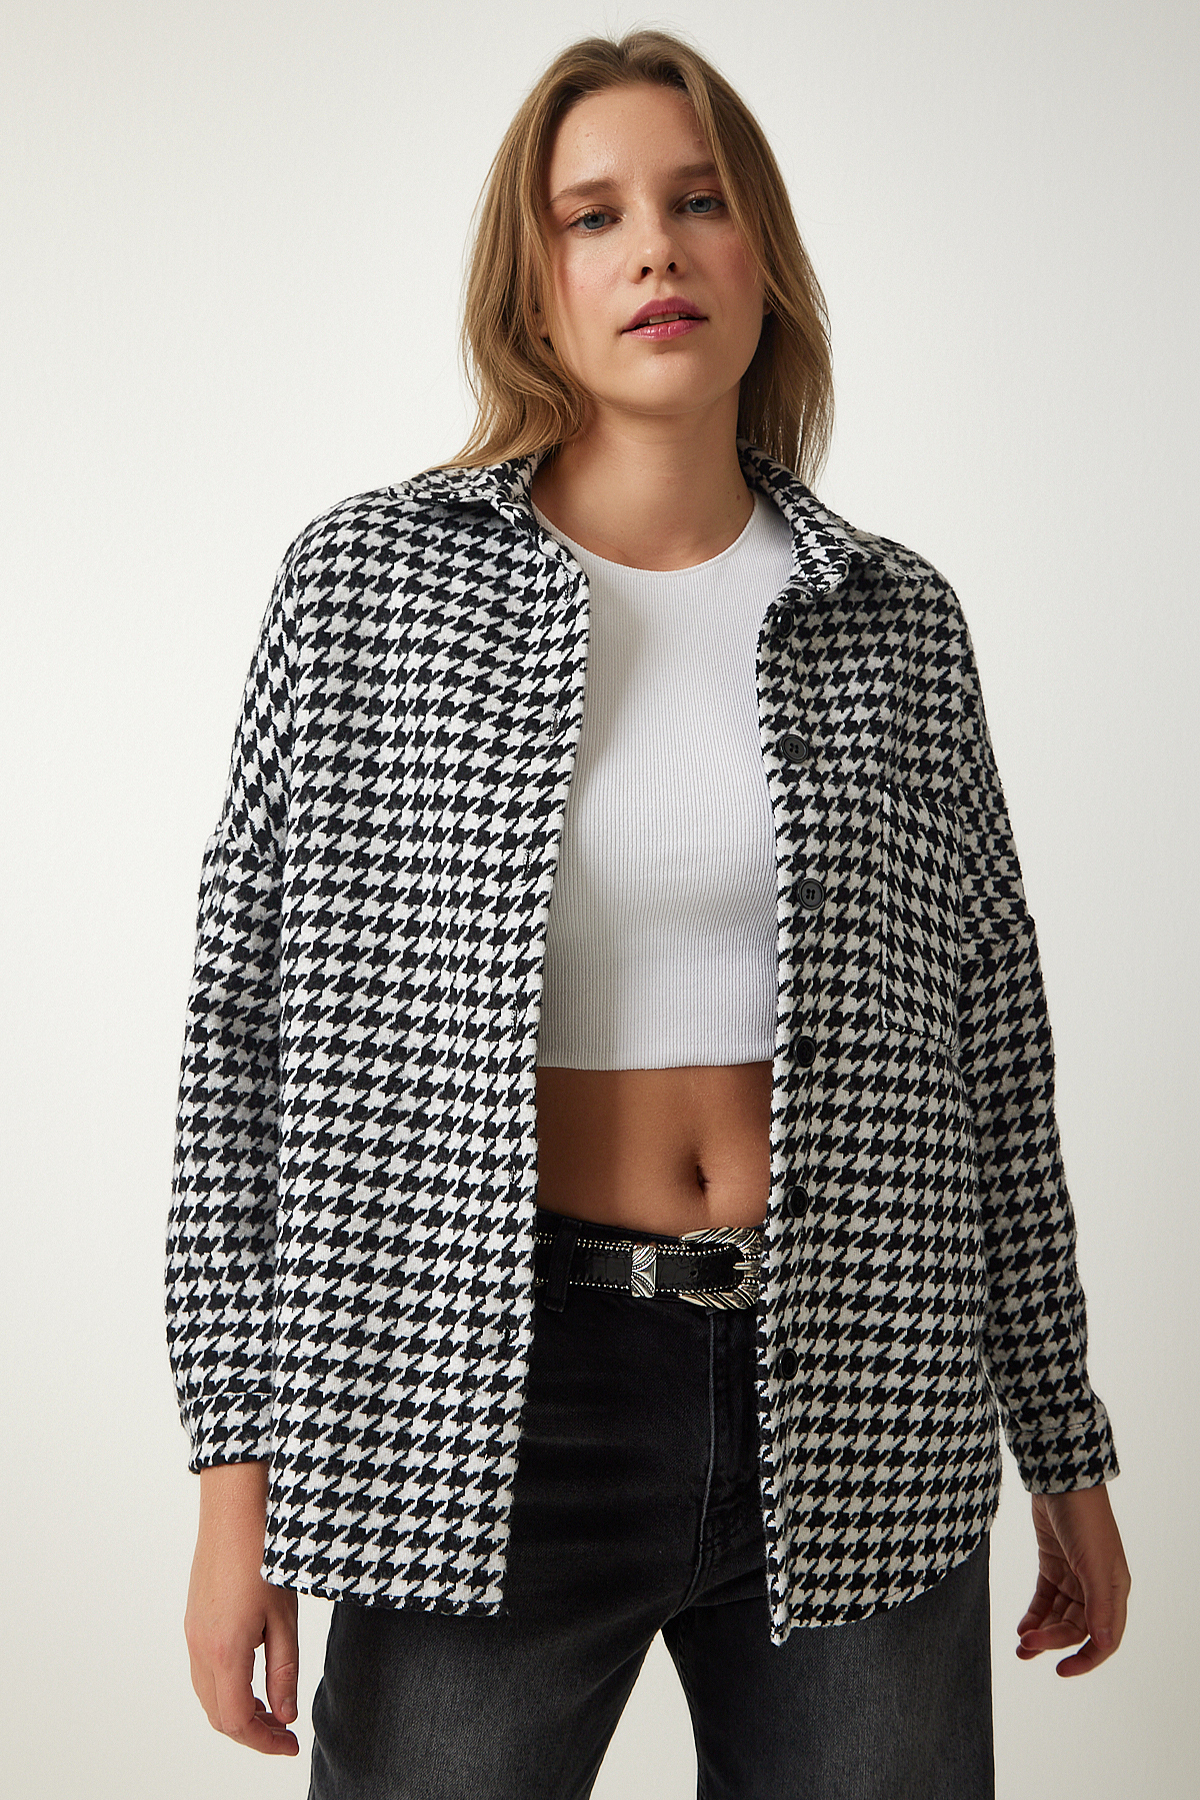 Levně Happiness İstanbul Women's Black and White Houndstooth Patterned Cachet Jacket Shirt